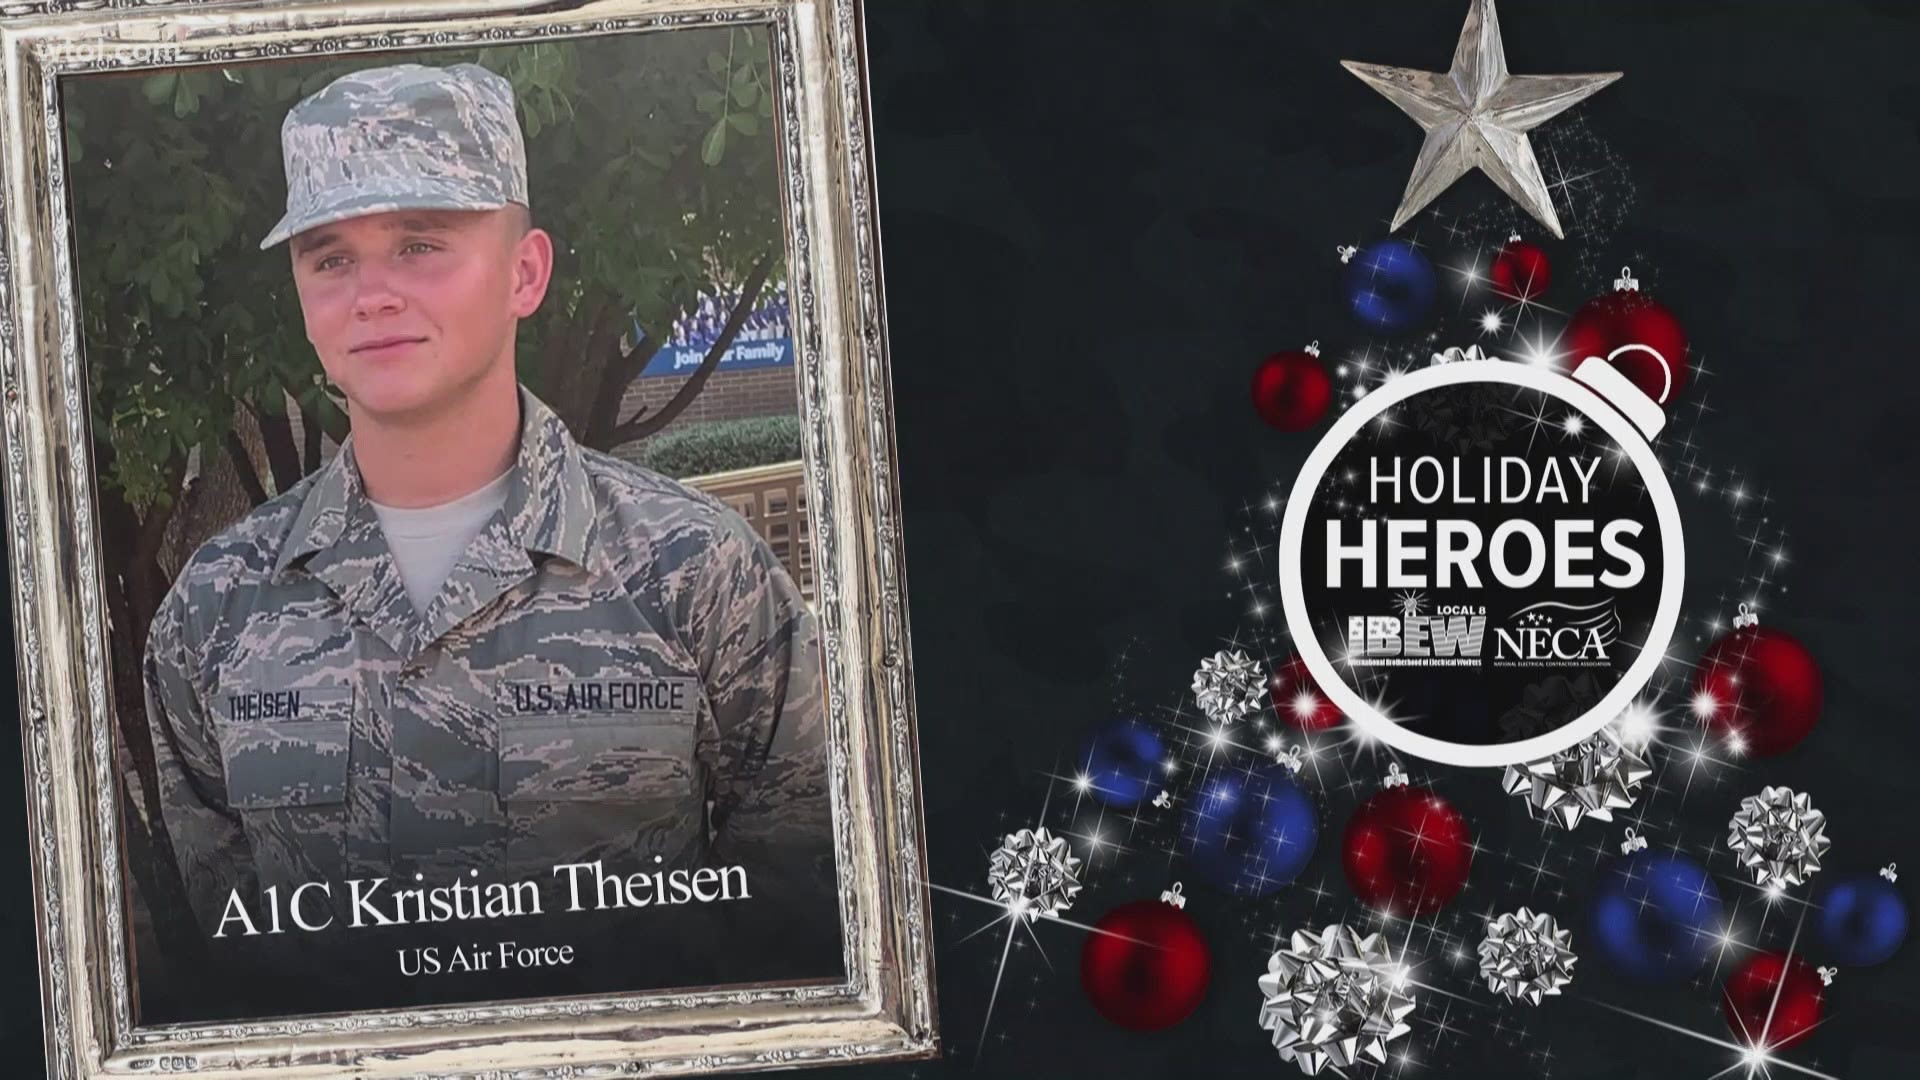 Let's take a moment now to honor Tuesday's holiday hero, Kristian Theisen.
He was nominated by his parents who are quite proud of him.